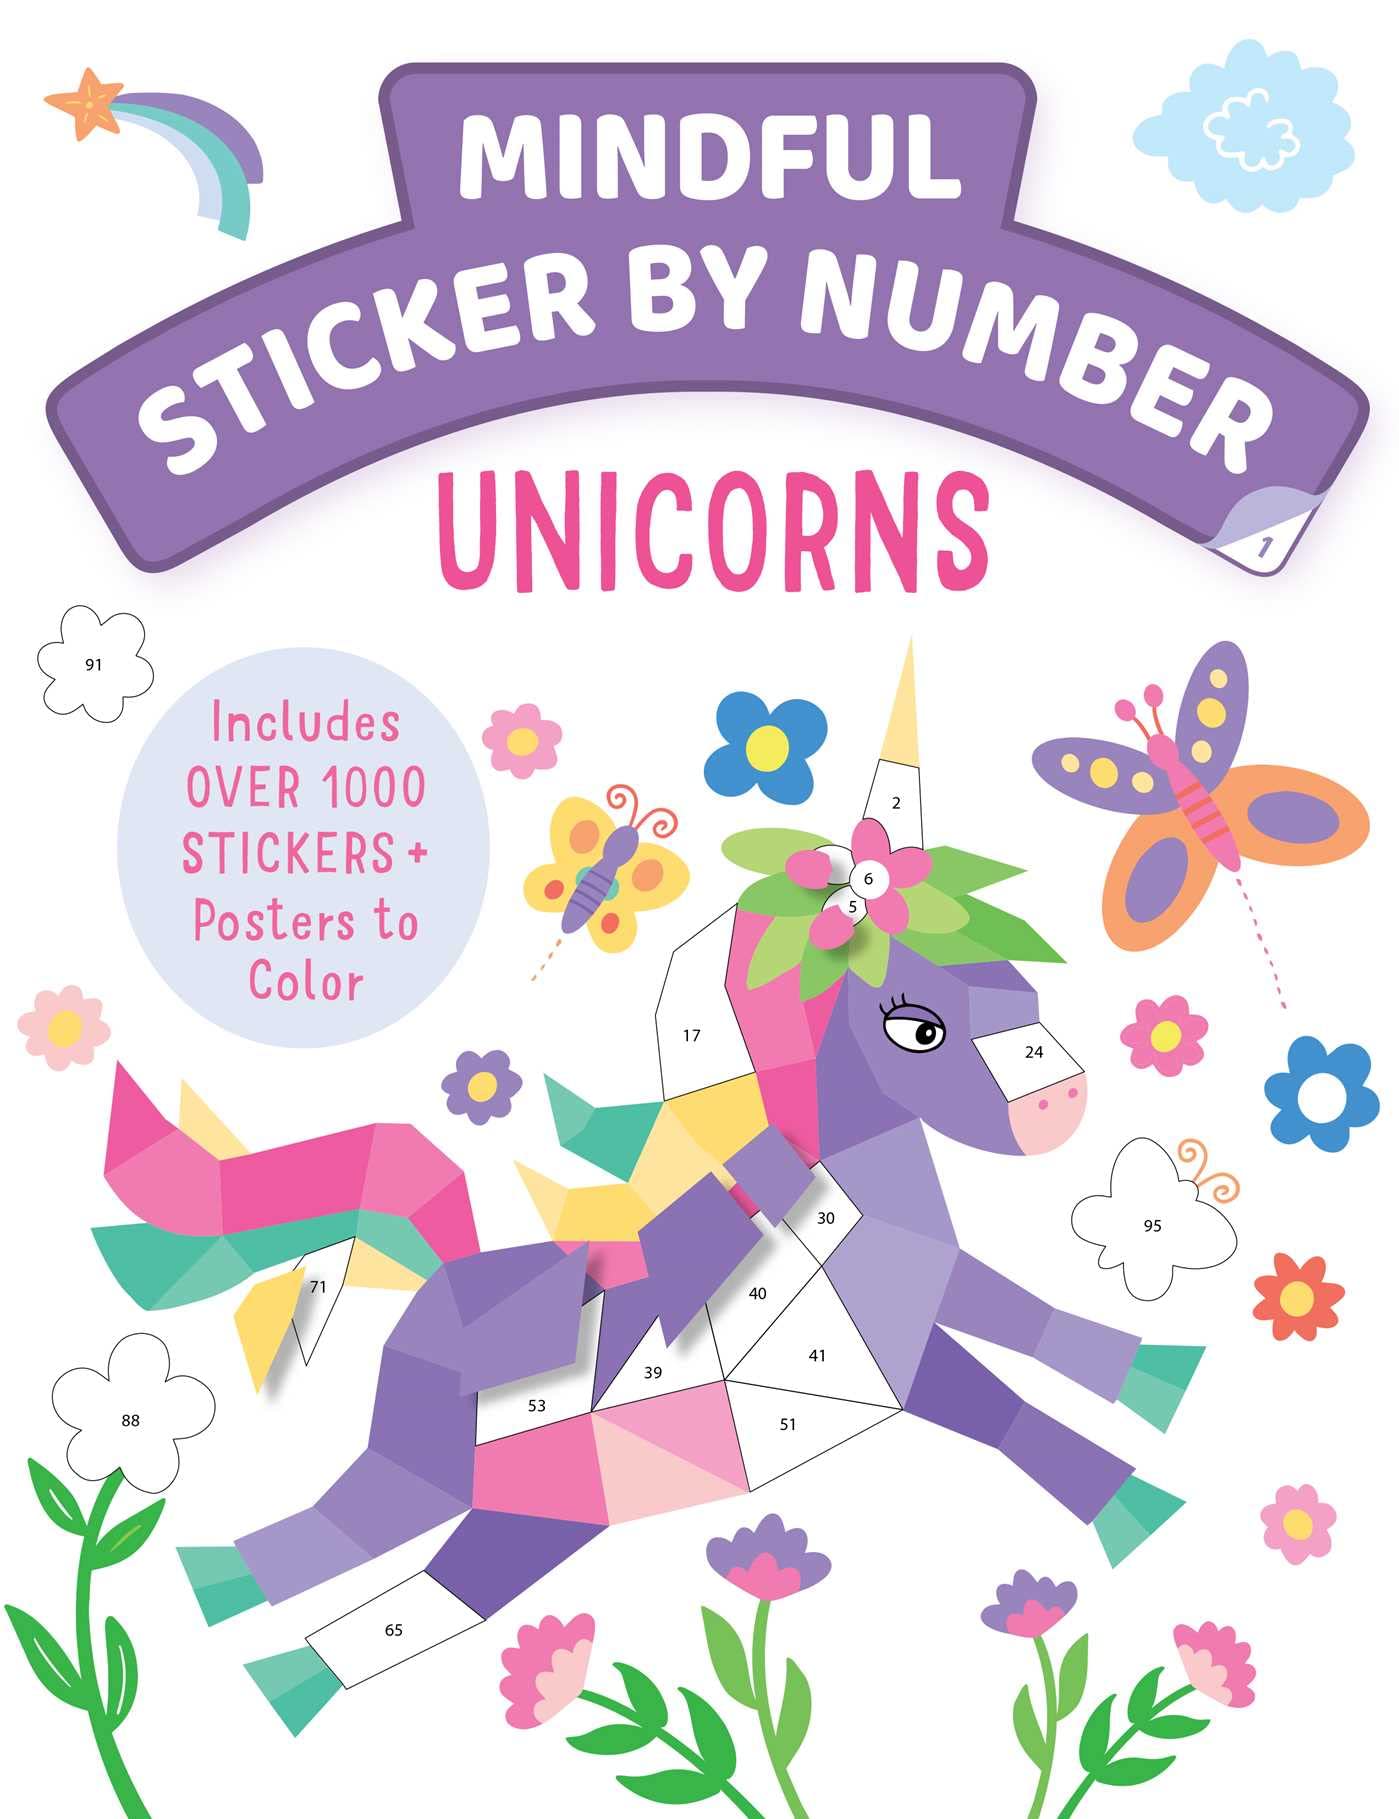 Mindful Sticker By Number: Unicorns